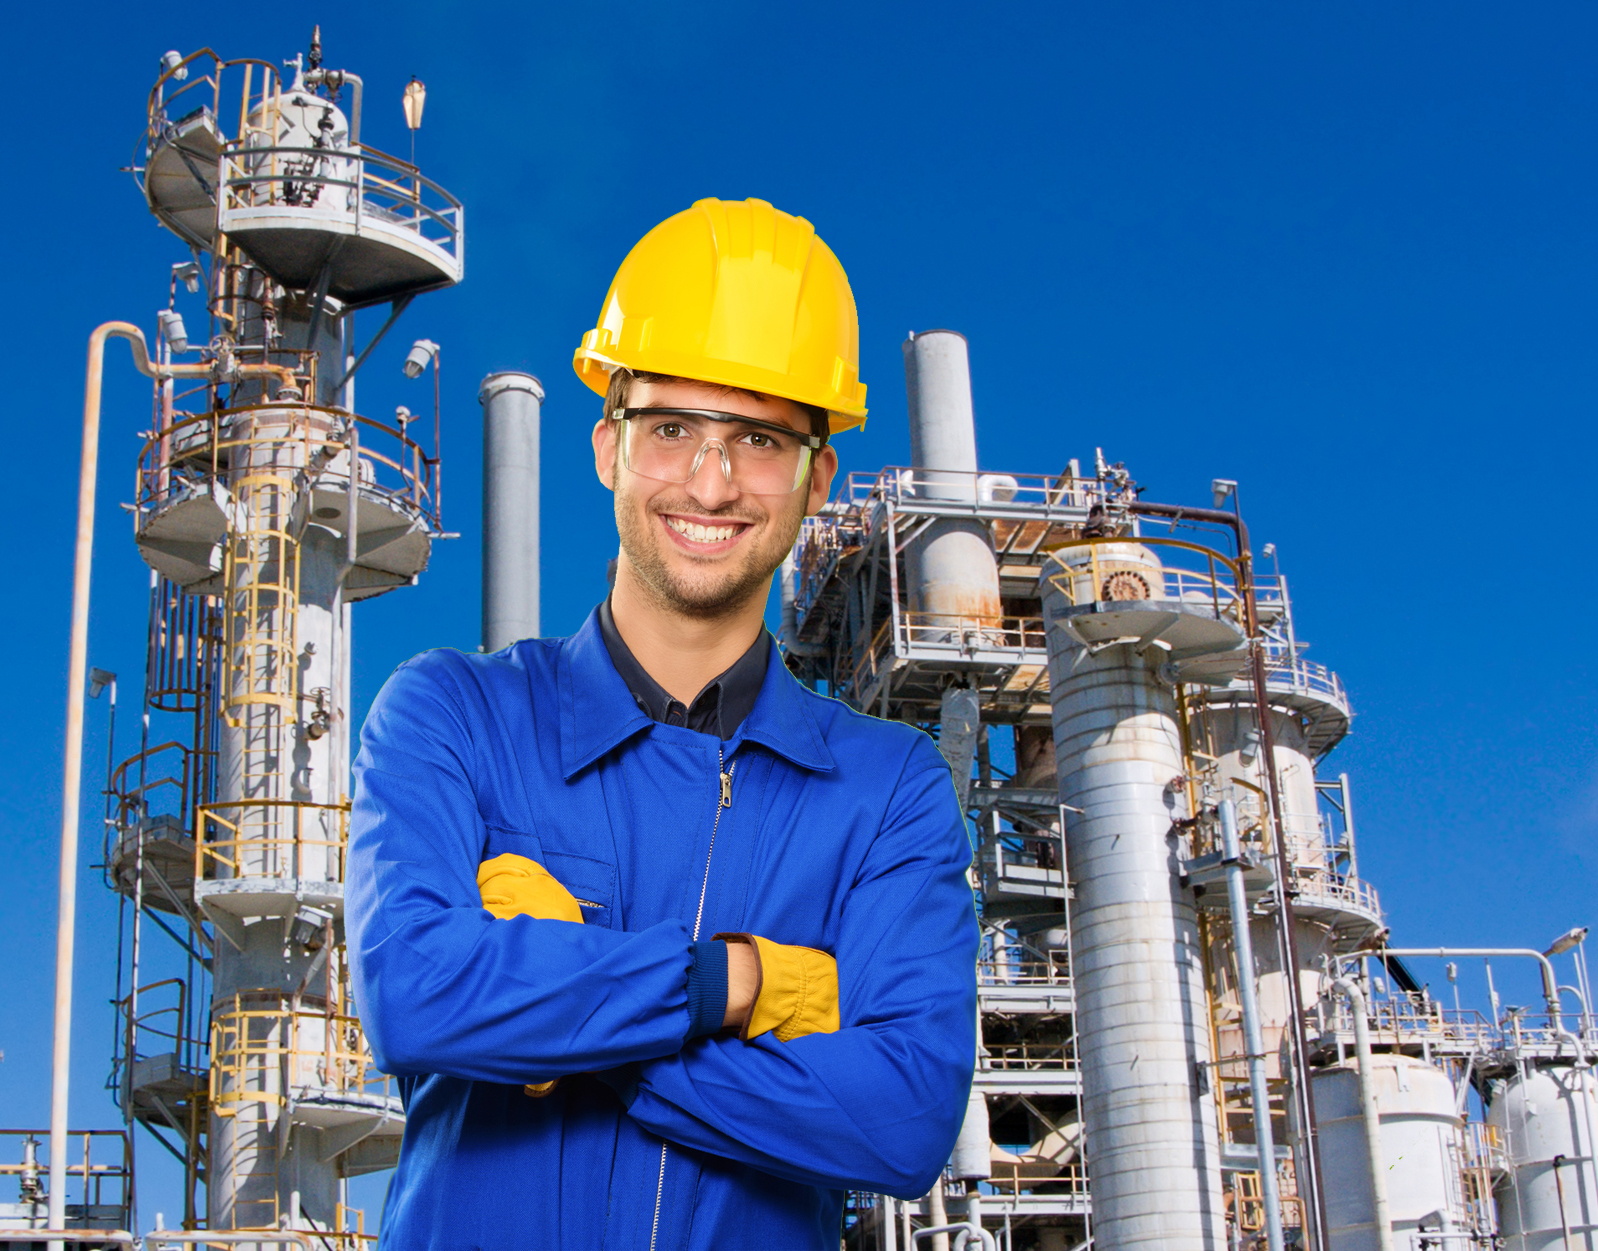 Engineers careers. Ойл ИНЖИНИРИНГ. Oil and Gas industry professional. ГАЗ инженерия. Safety in Oil and Gas industry.